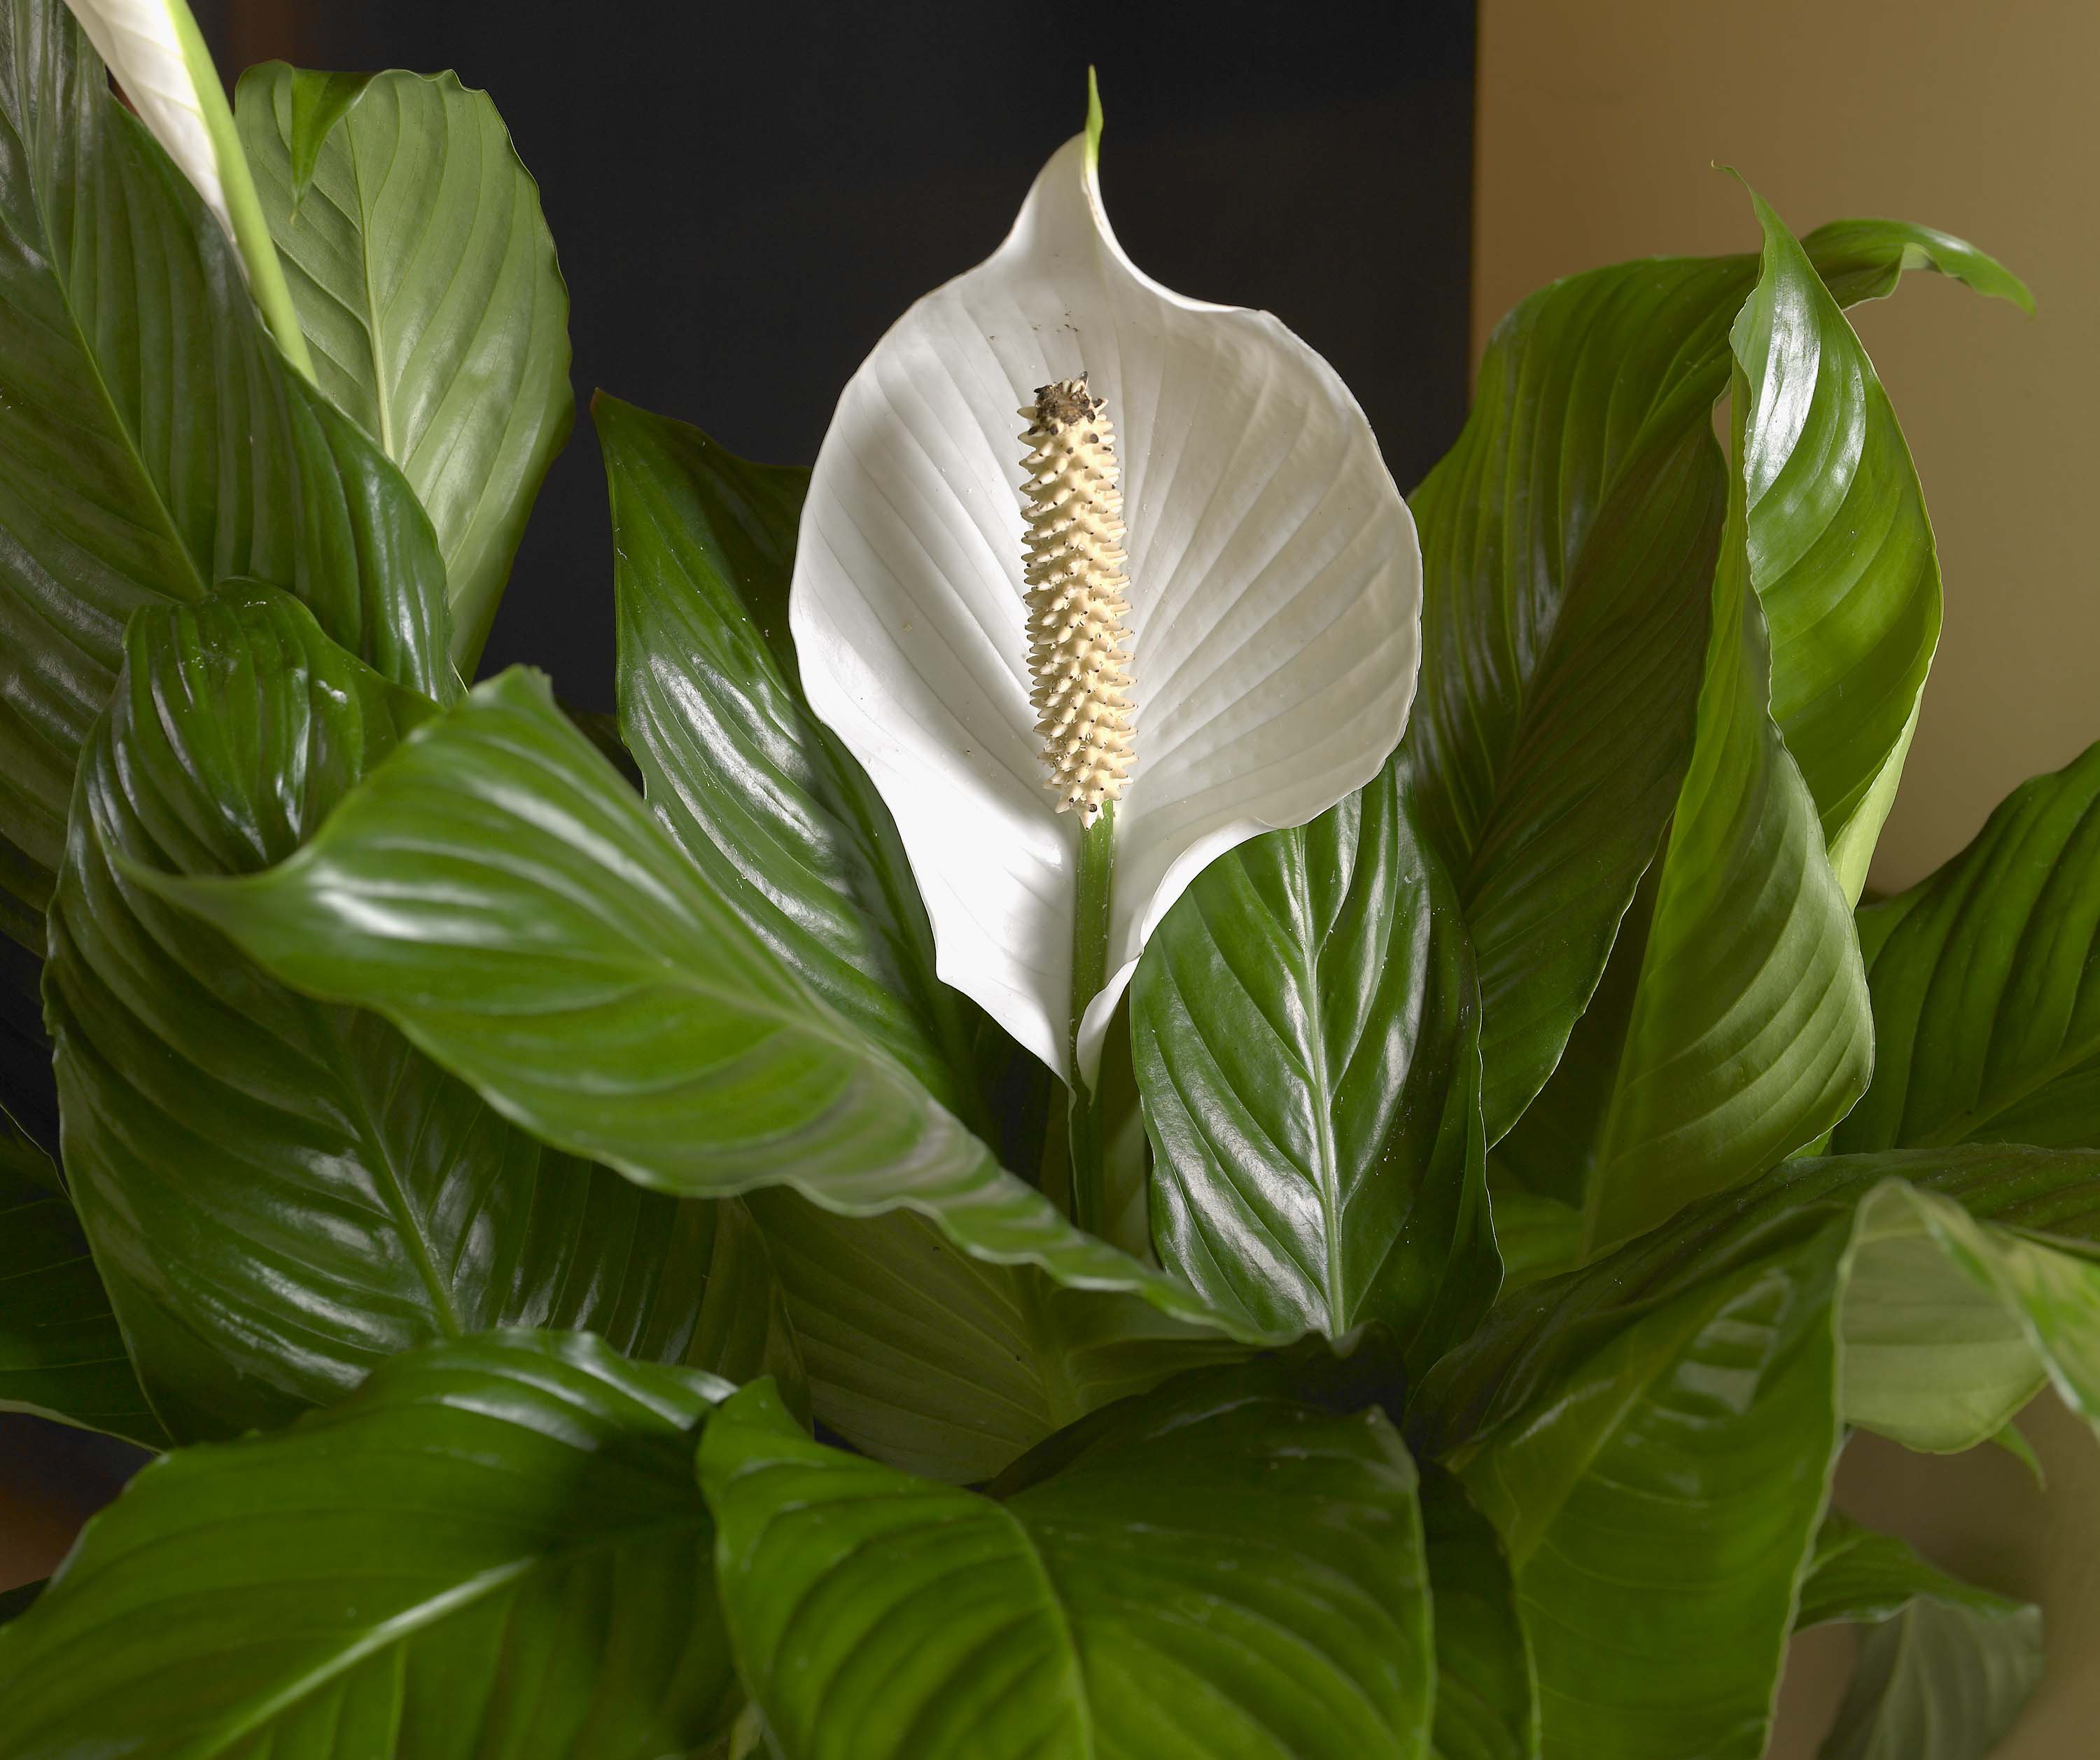 With broad, green leaves and white, calla-like flowers all year long, peace lily is sure to bring a breath of fresh air to any space.